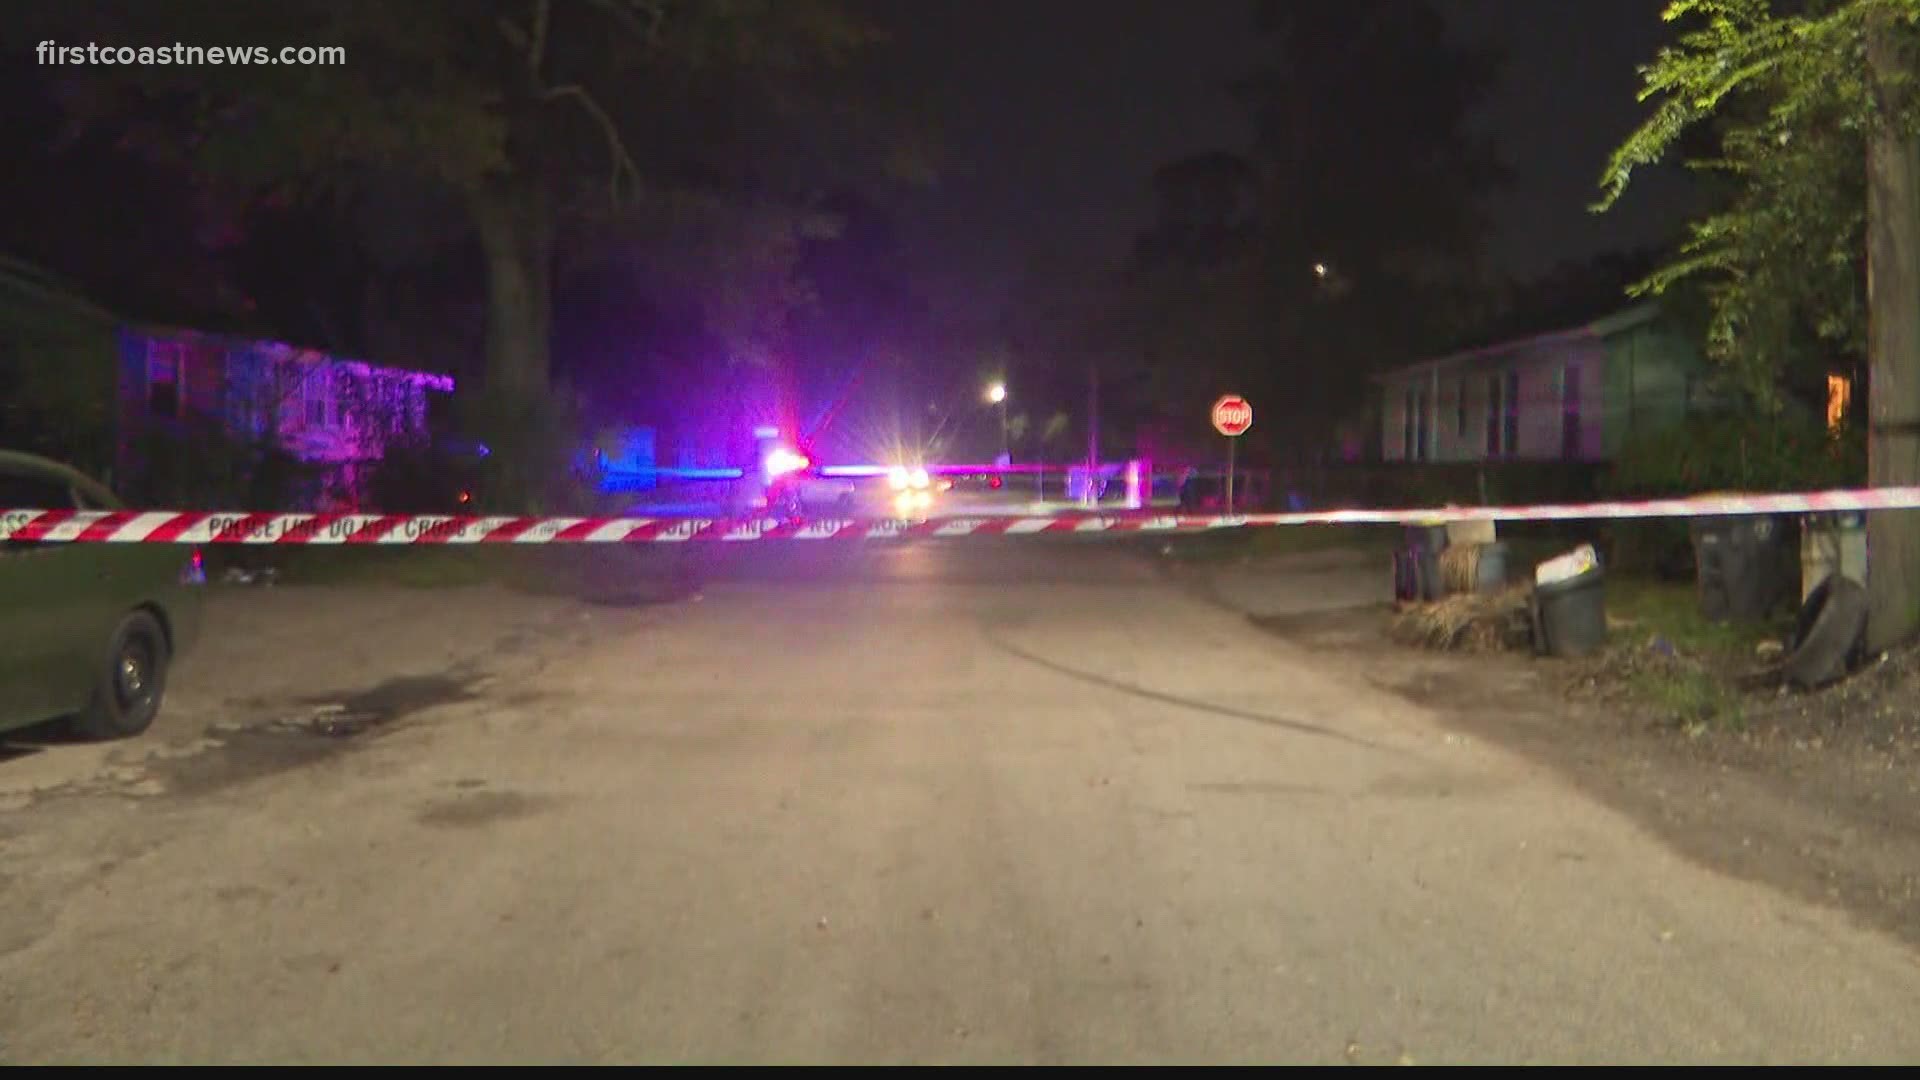 The Jacksonville Sheriff's Office said the shooting happened in 1500 block of W 26th Street.